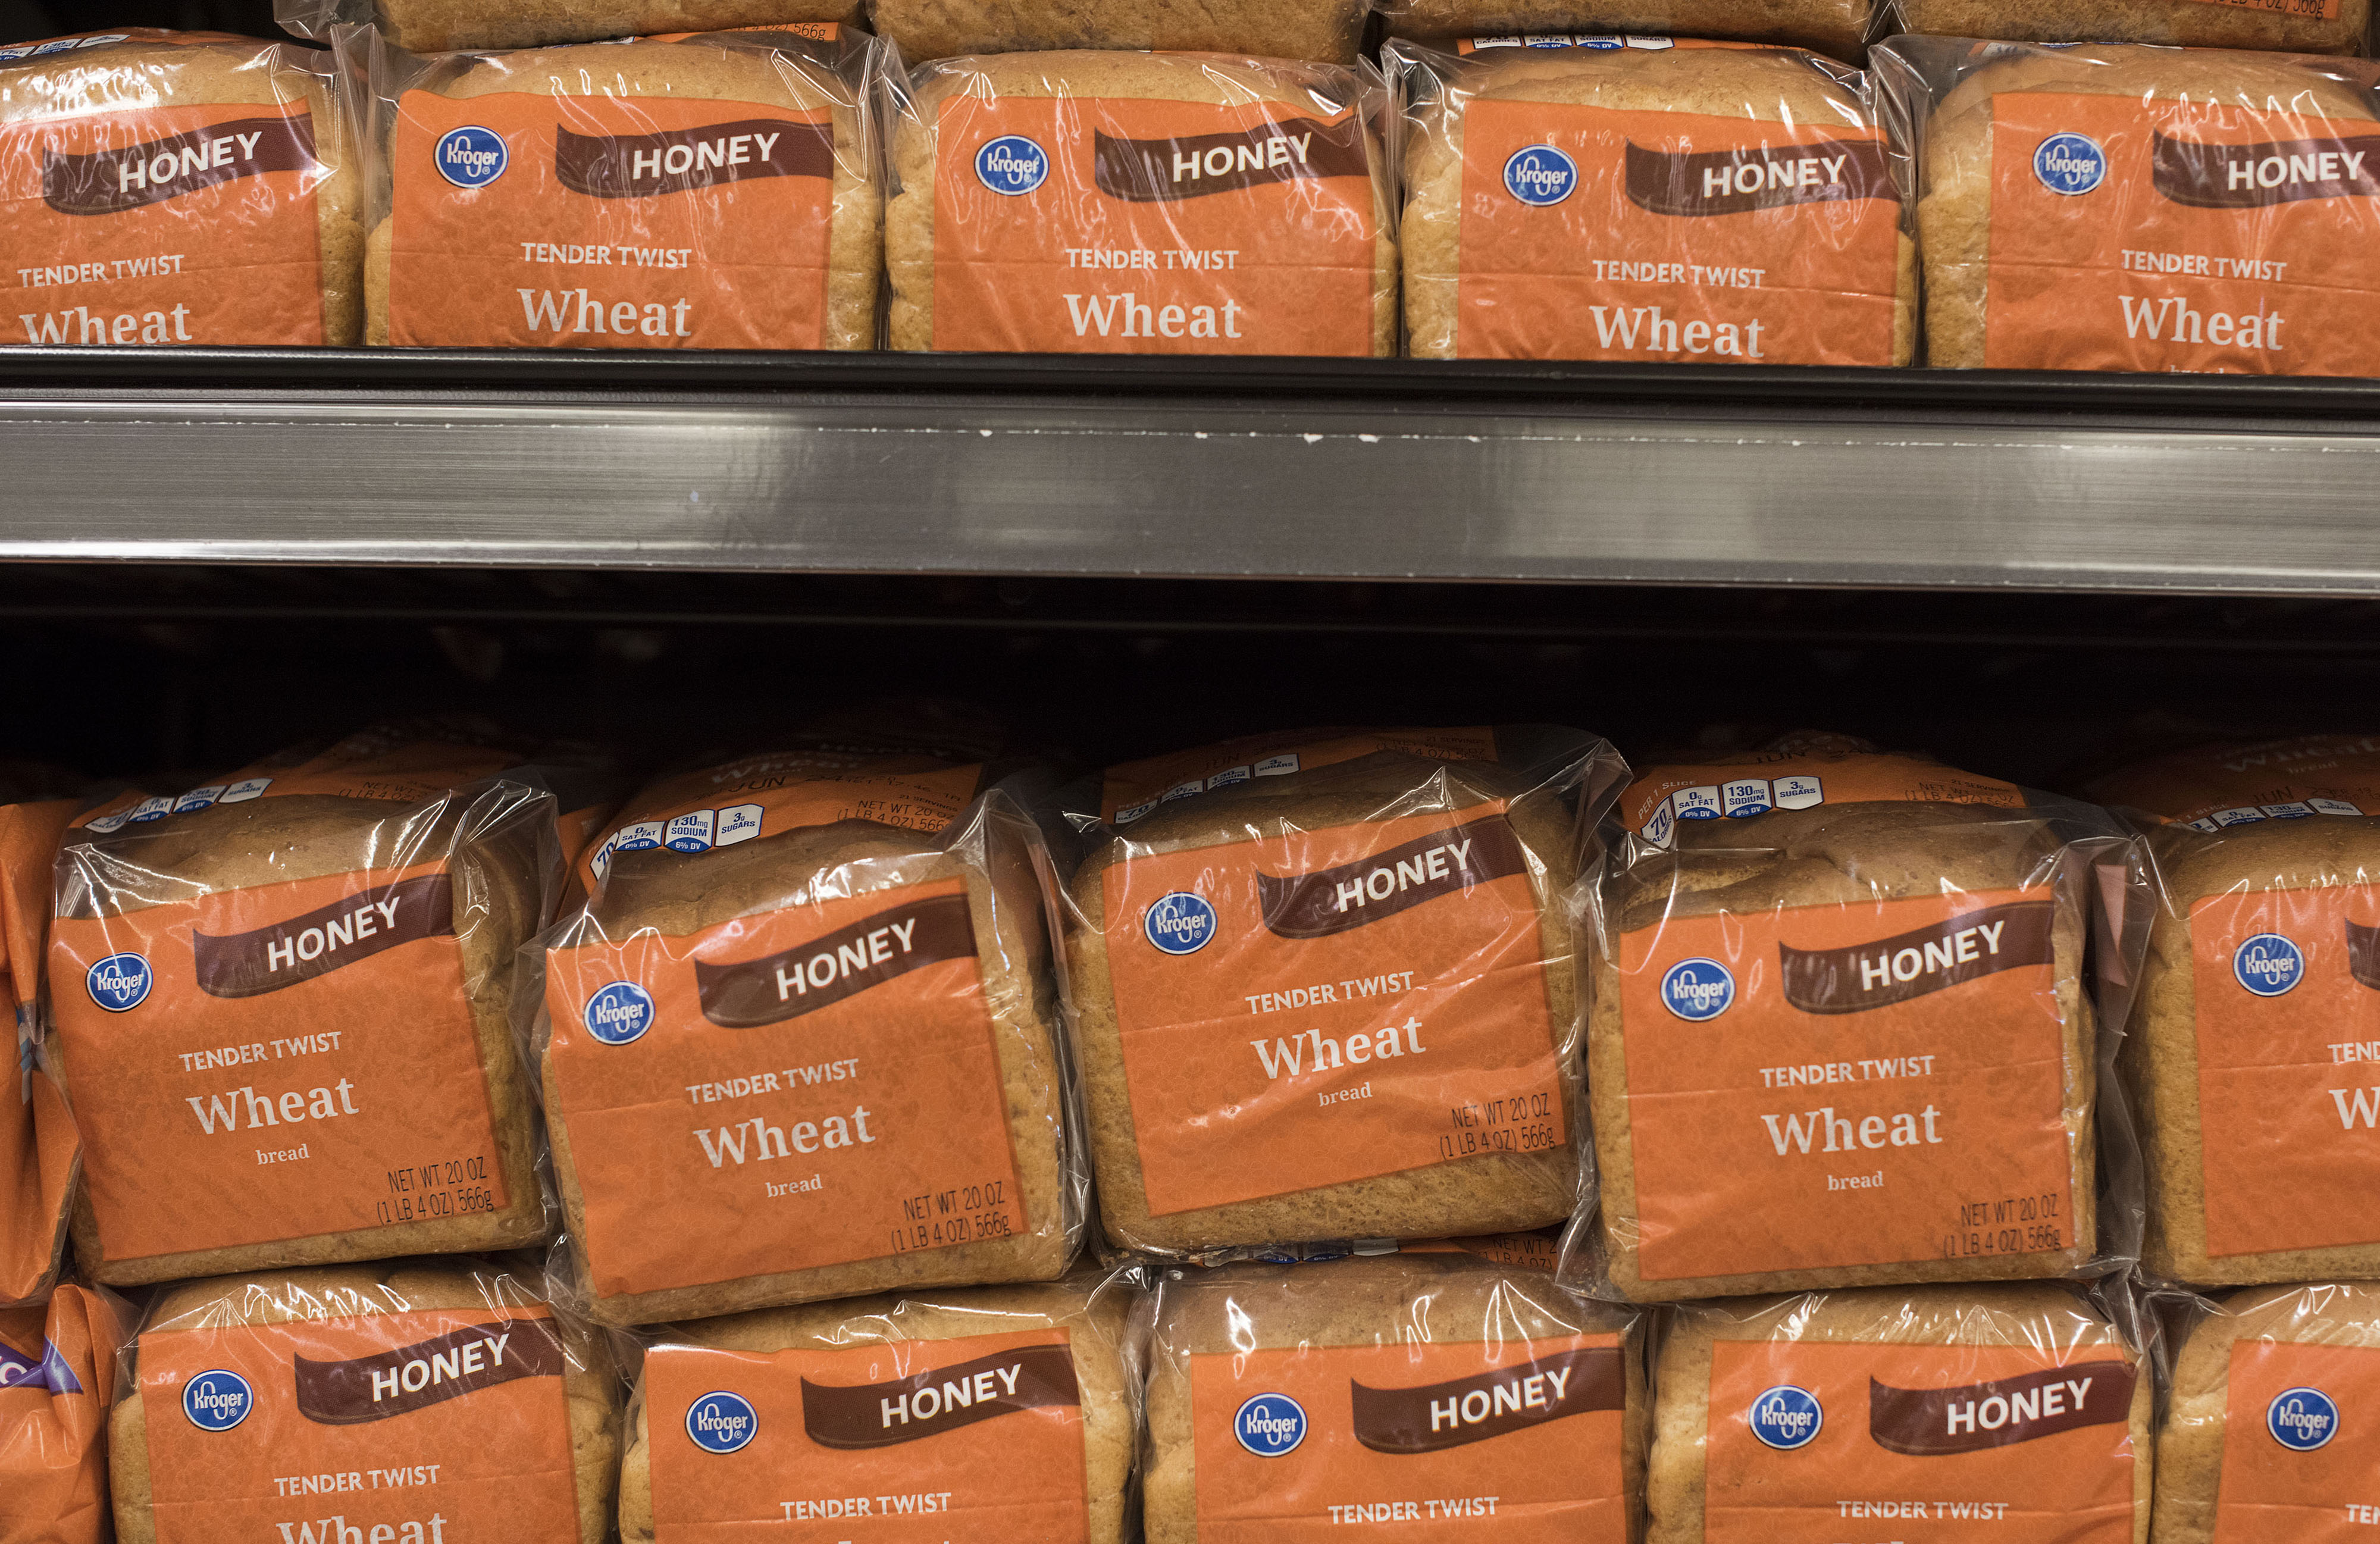 Kroger brand bread sits on a shelf at a Kroger store in Peoria, Illinois, U.S., on Tuesday, June 16, 2015. The Kroger Co. is expected to report quarterly earnings on Thursday, June 18, 2015.
